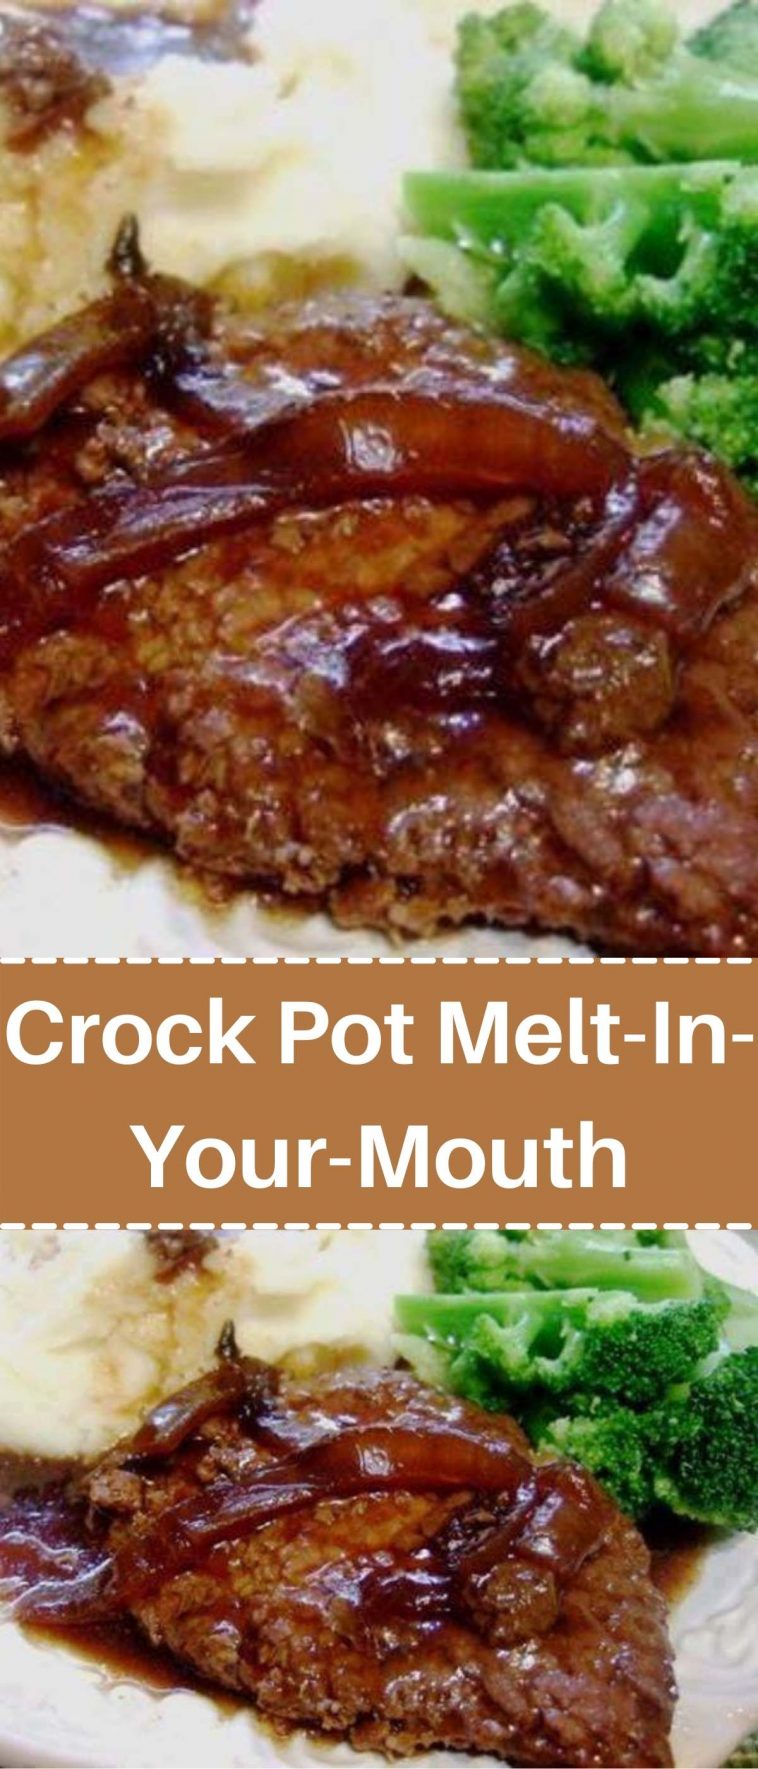 Crock Pot Melt-In-Your-Mouth